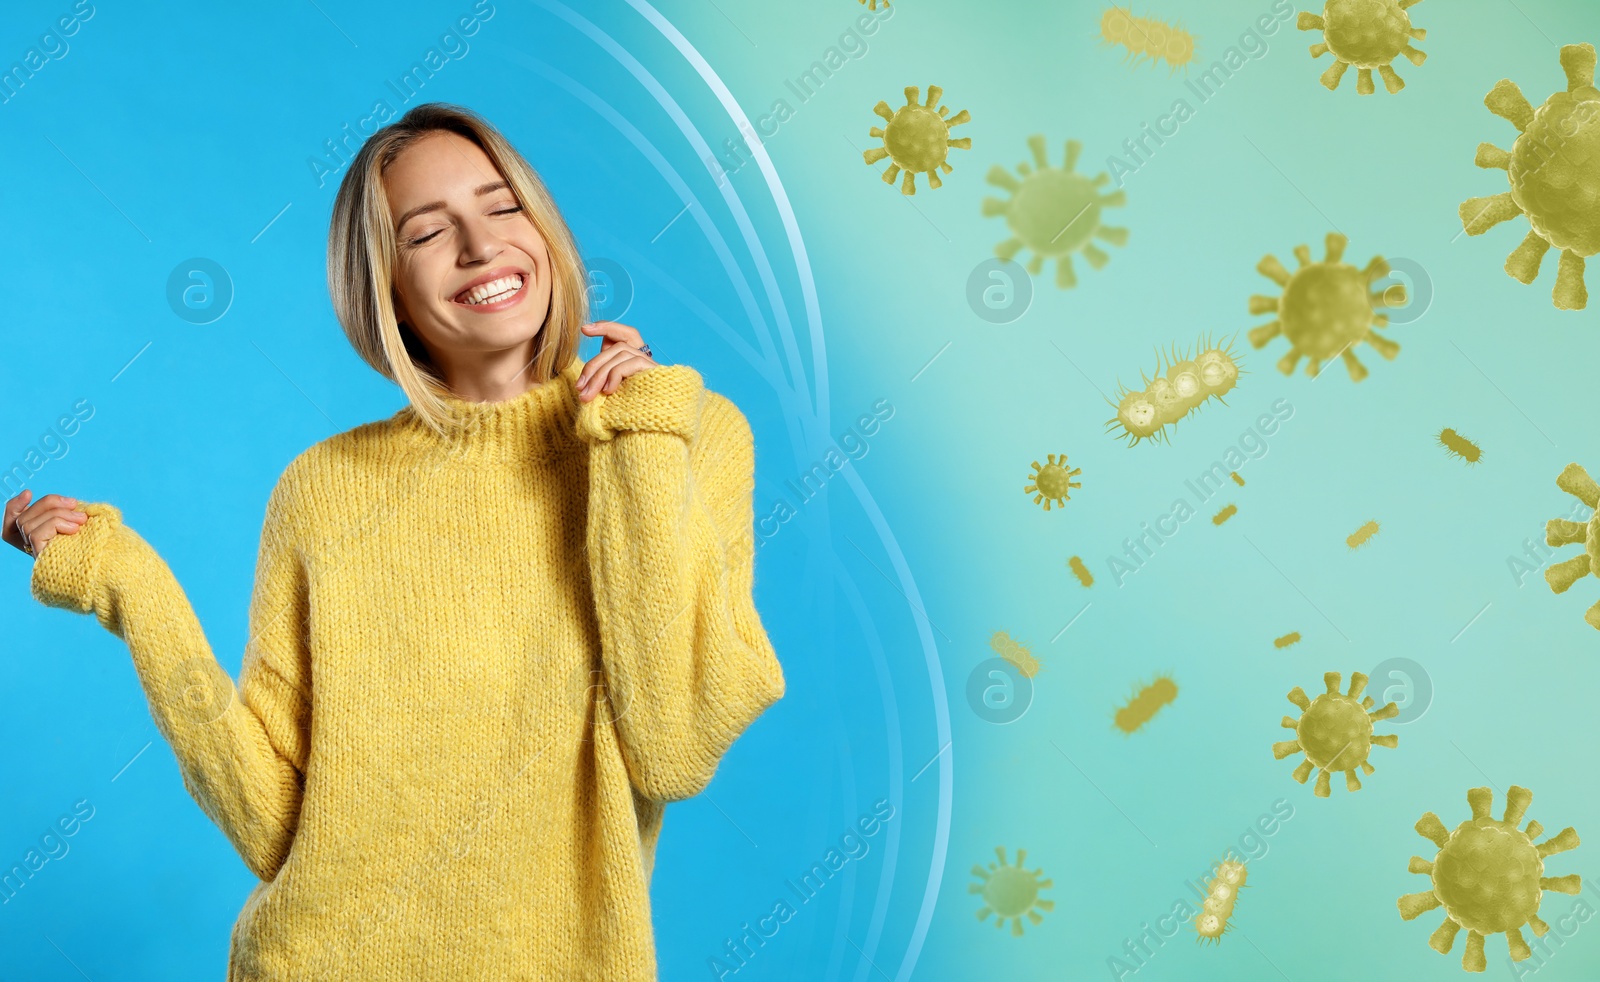 Image of Woman with strong immunity surrounded by viruses on light blue background